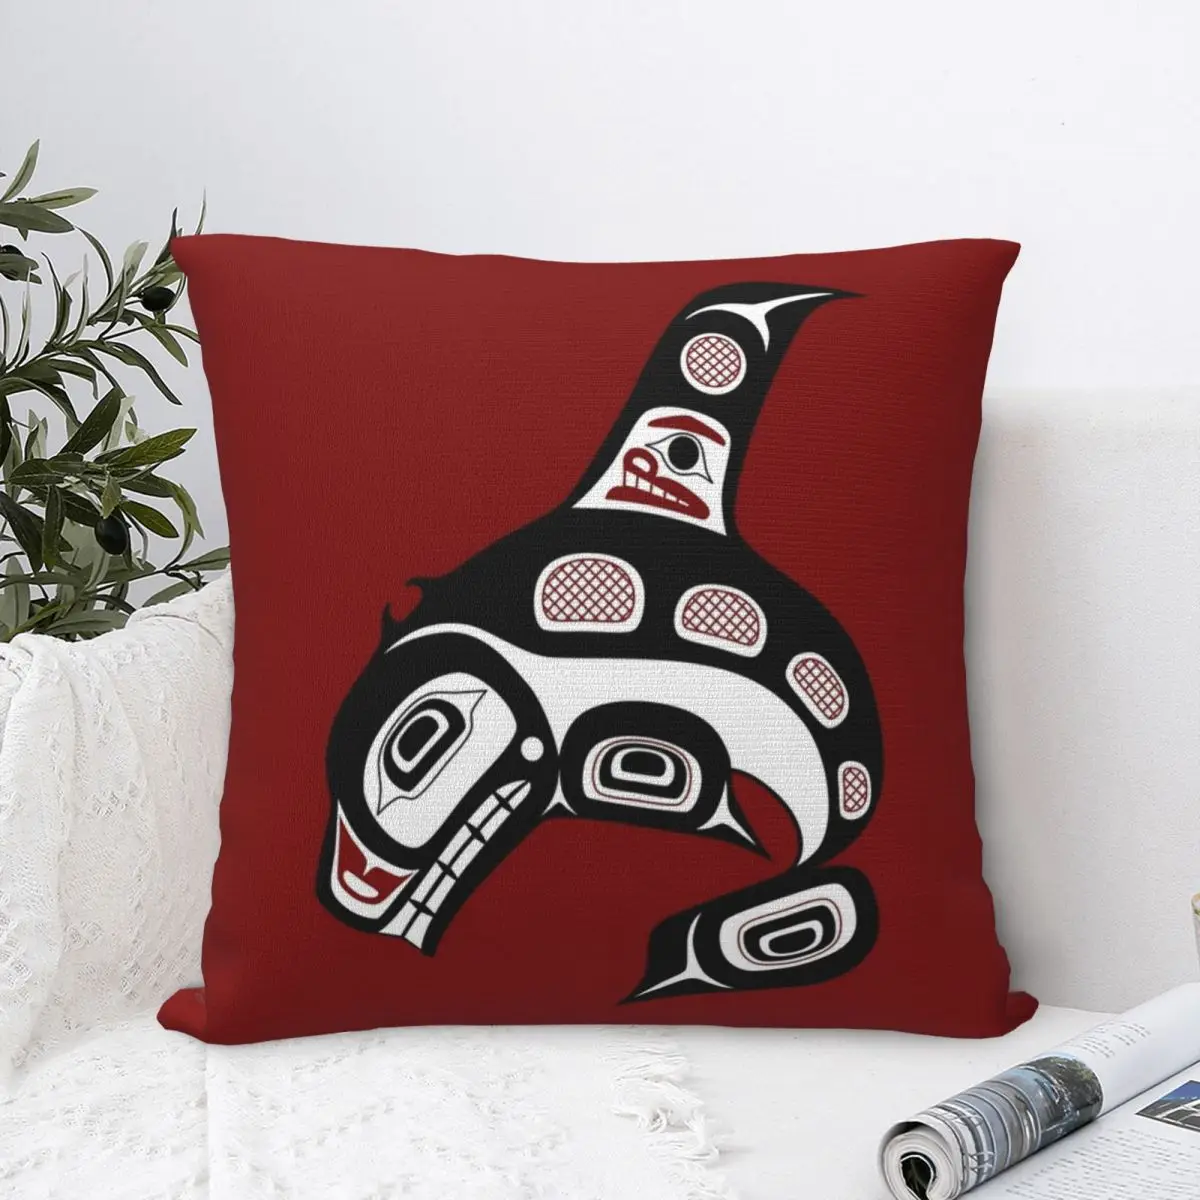 

Northwest Pacific Coast Haida Art Killer Whale Square Pillowcase Cushion Cover Comfort Pillow Case Polyester Throw Pillow cover